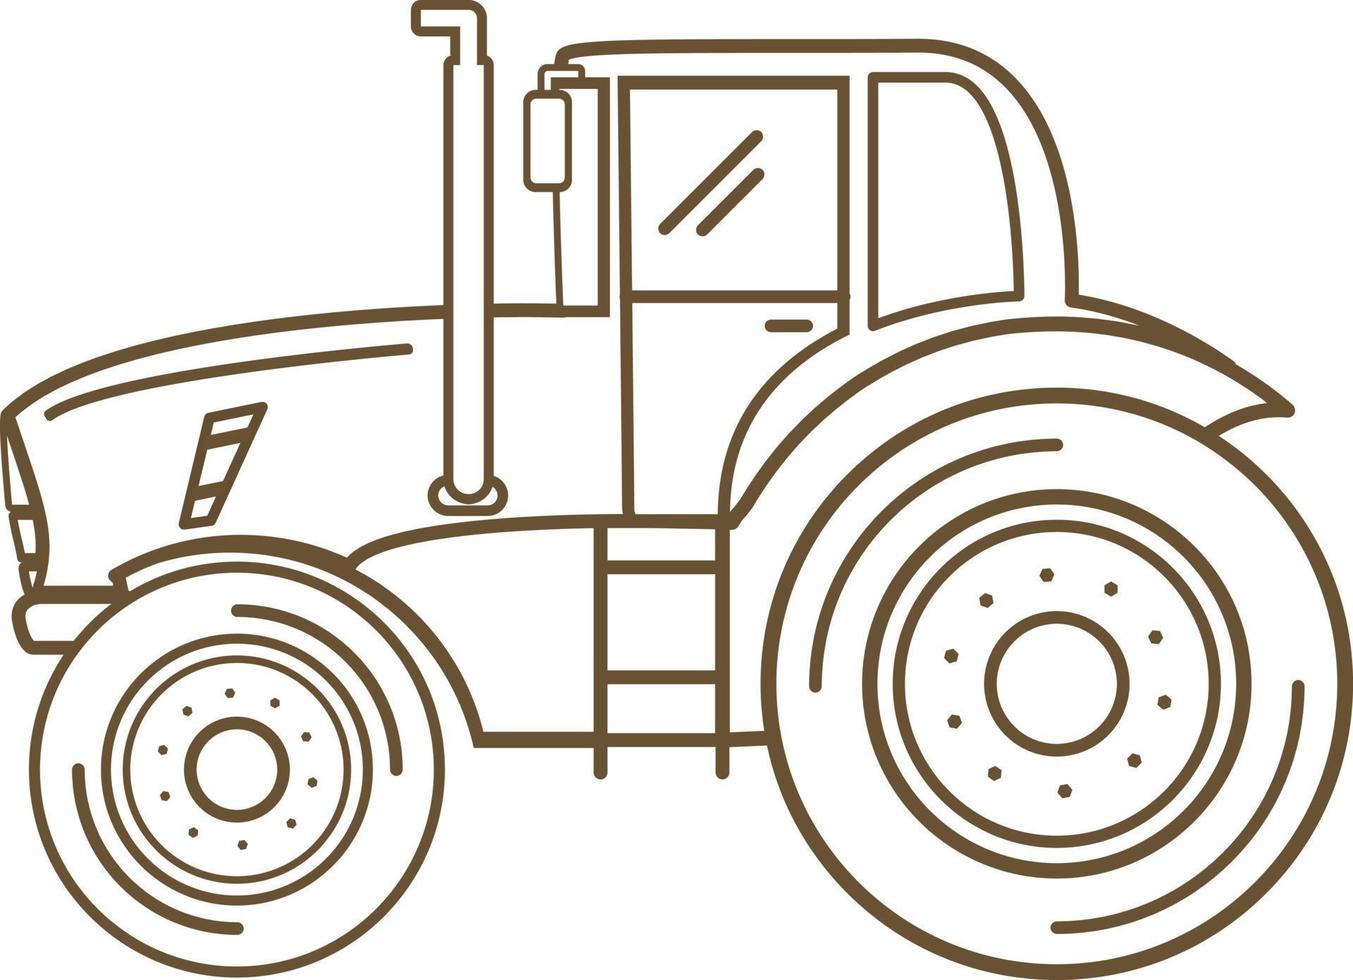 Tractor farm .Heavy agricultural vehicles machinery for field work of harvesting.Cartoon vector fla line art design.Farm transport.Side view and front view